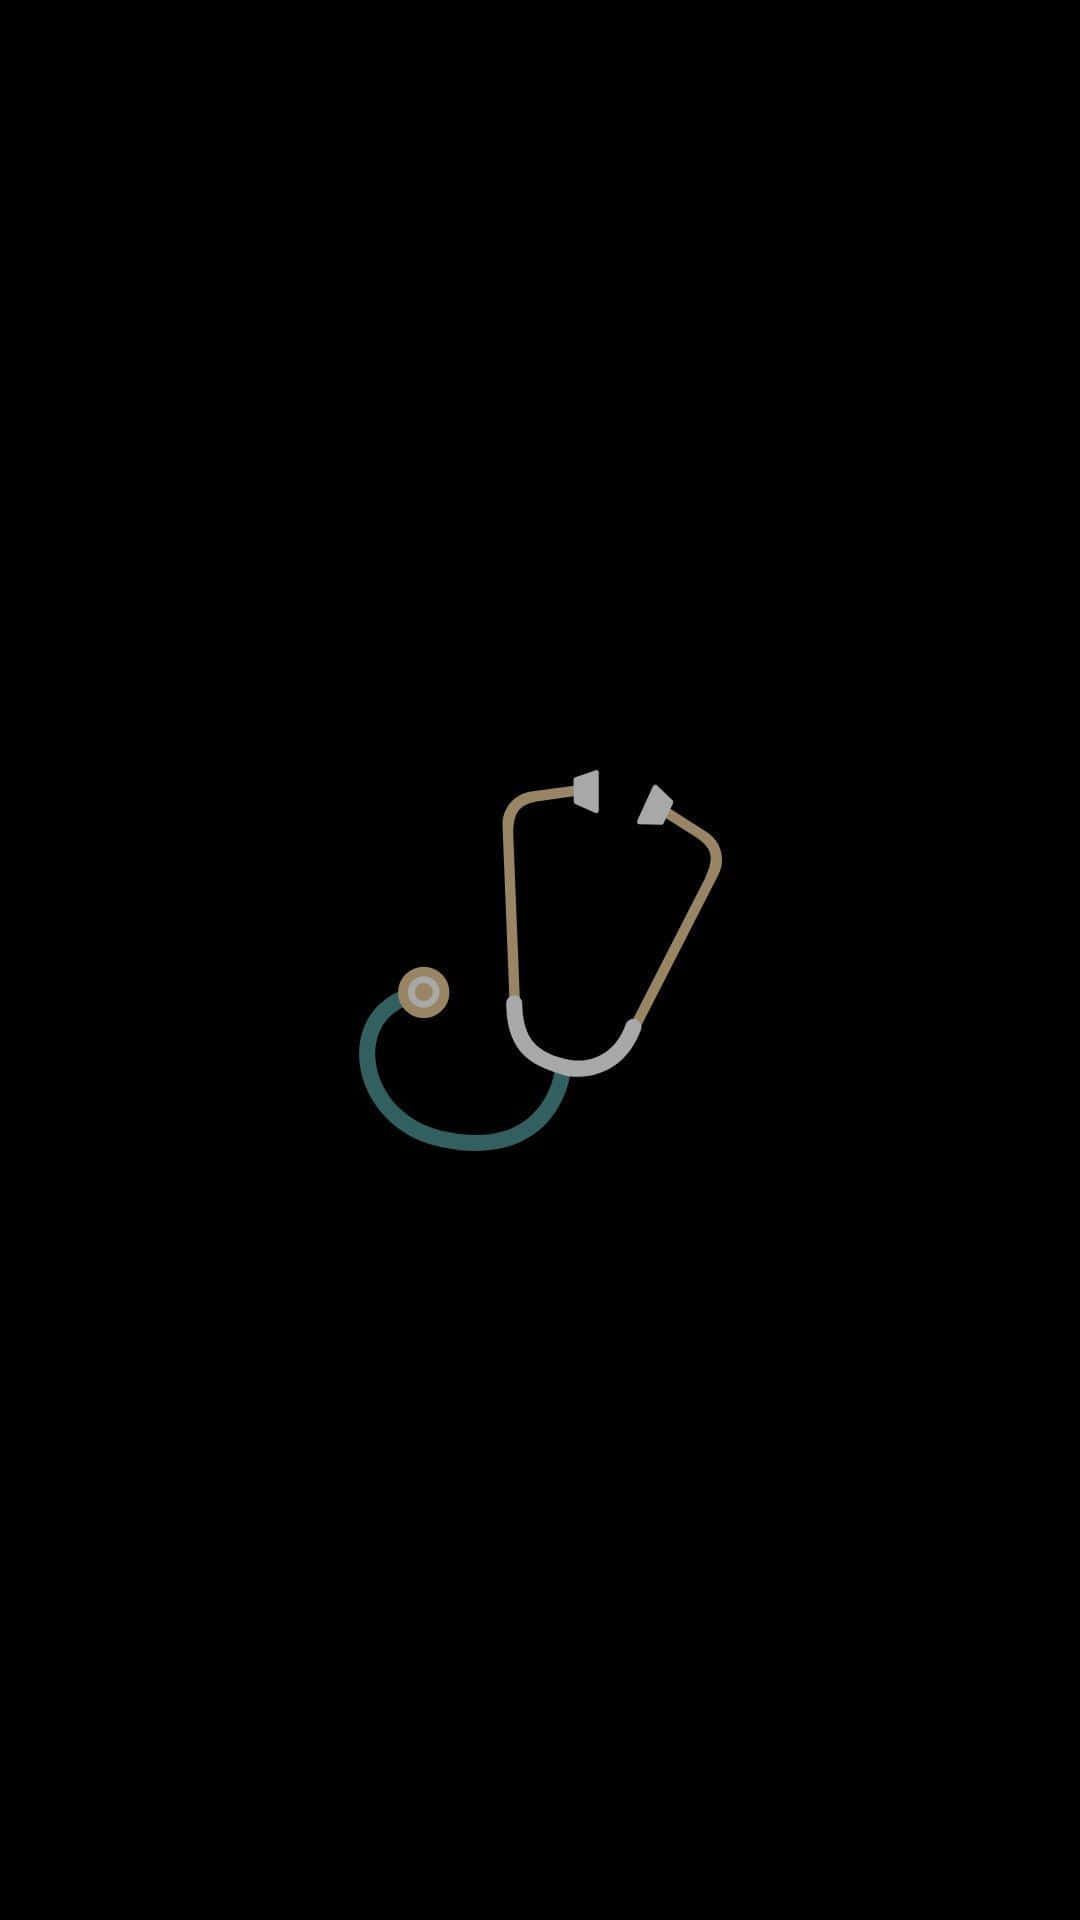 A Stethoscope On A Black Background Wallpaper